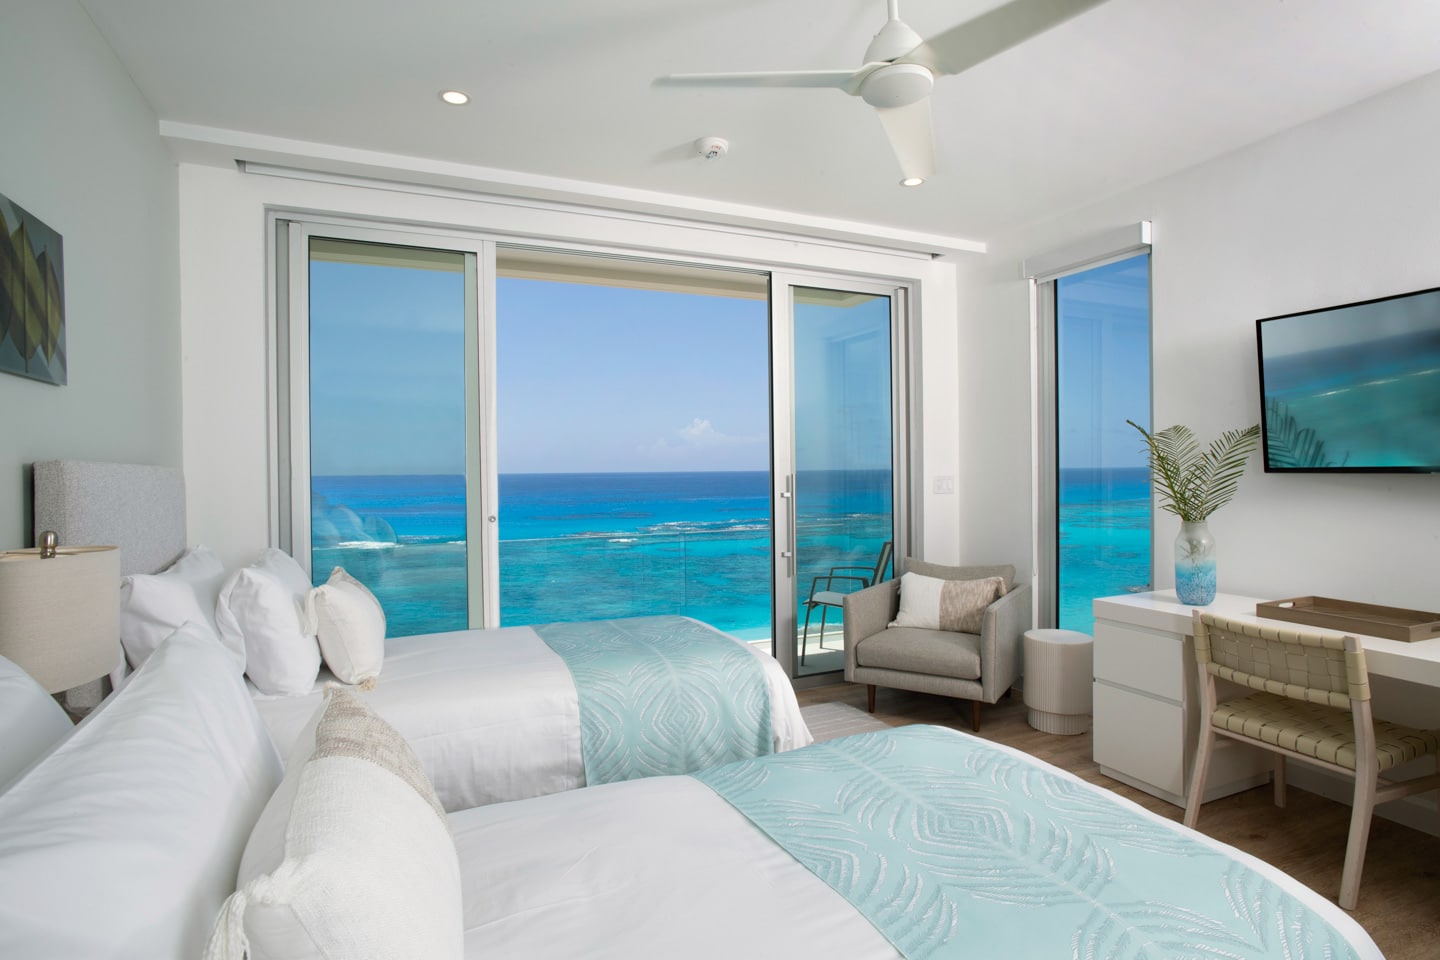 A bedroom with two beds, a desk, and glass sliding doors displaying an ocean view.